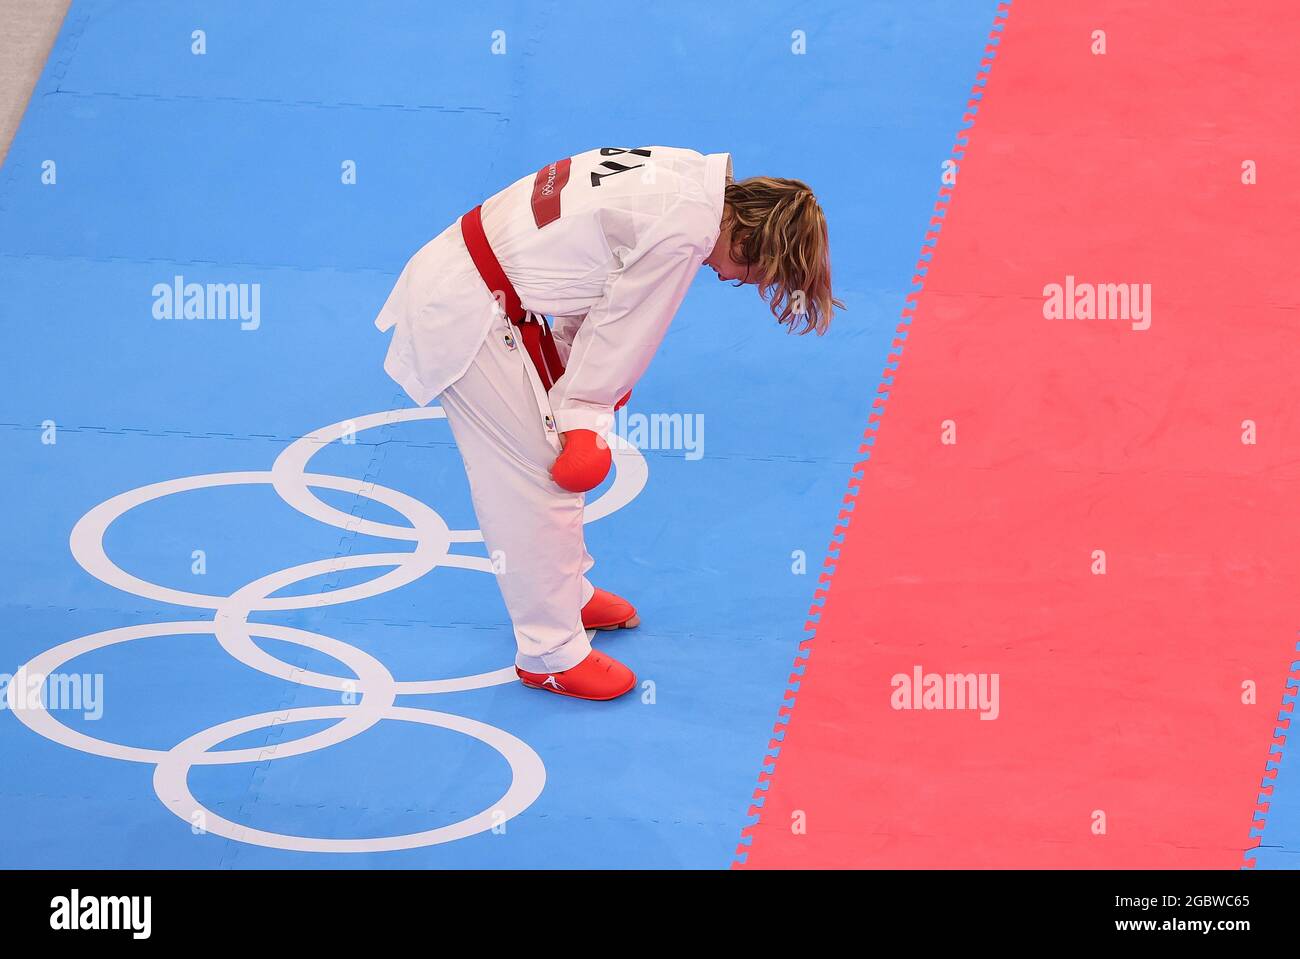 Dongjing, Japan. 5th Aug, 2021. Ivet Goranova of Bulgaria reacts after the women's kumite -55kg final of karate at Tokyo 2020 Olympic Games in Tokyo, Japan, Aug 5, 2021. Credit: Cao Can/Xinhua/Alamy Live News Stock Photo